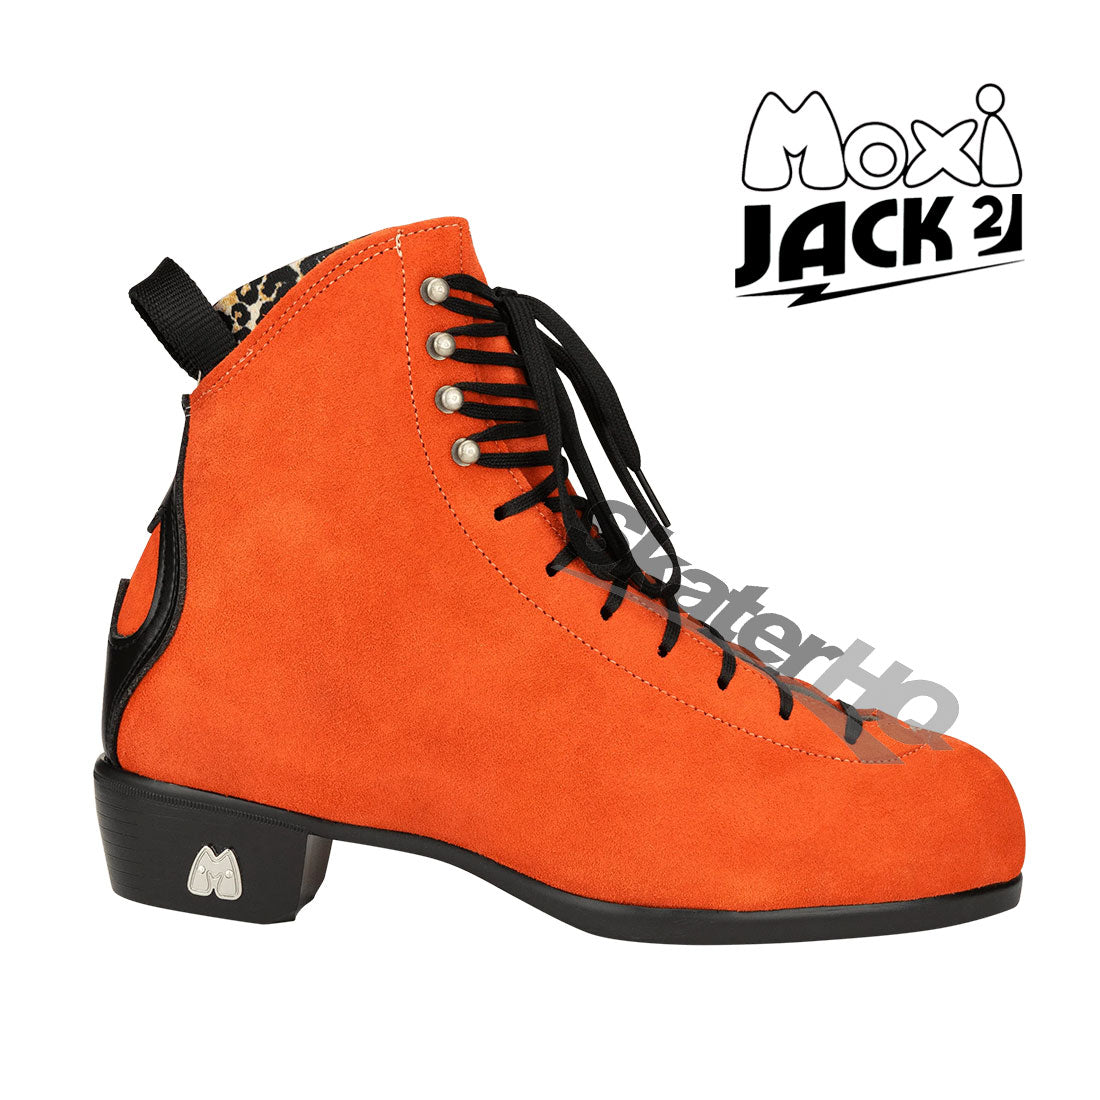 Moxi Jack 2 Boot - Special - Clementine Roller Skate Boots